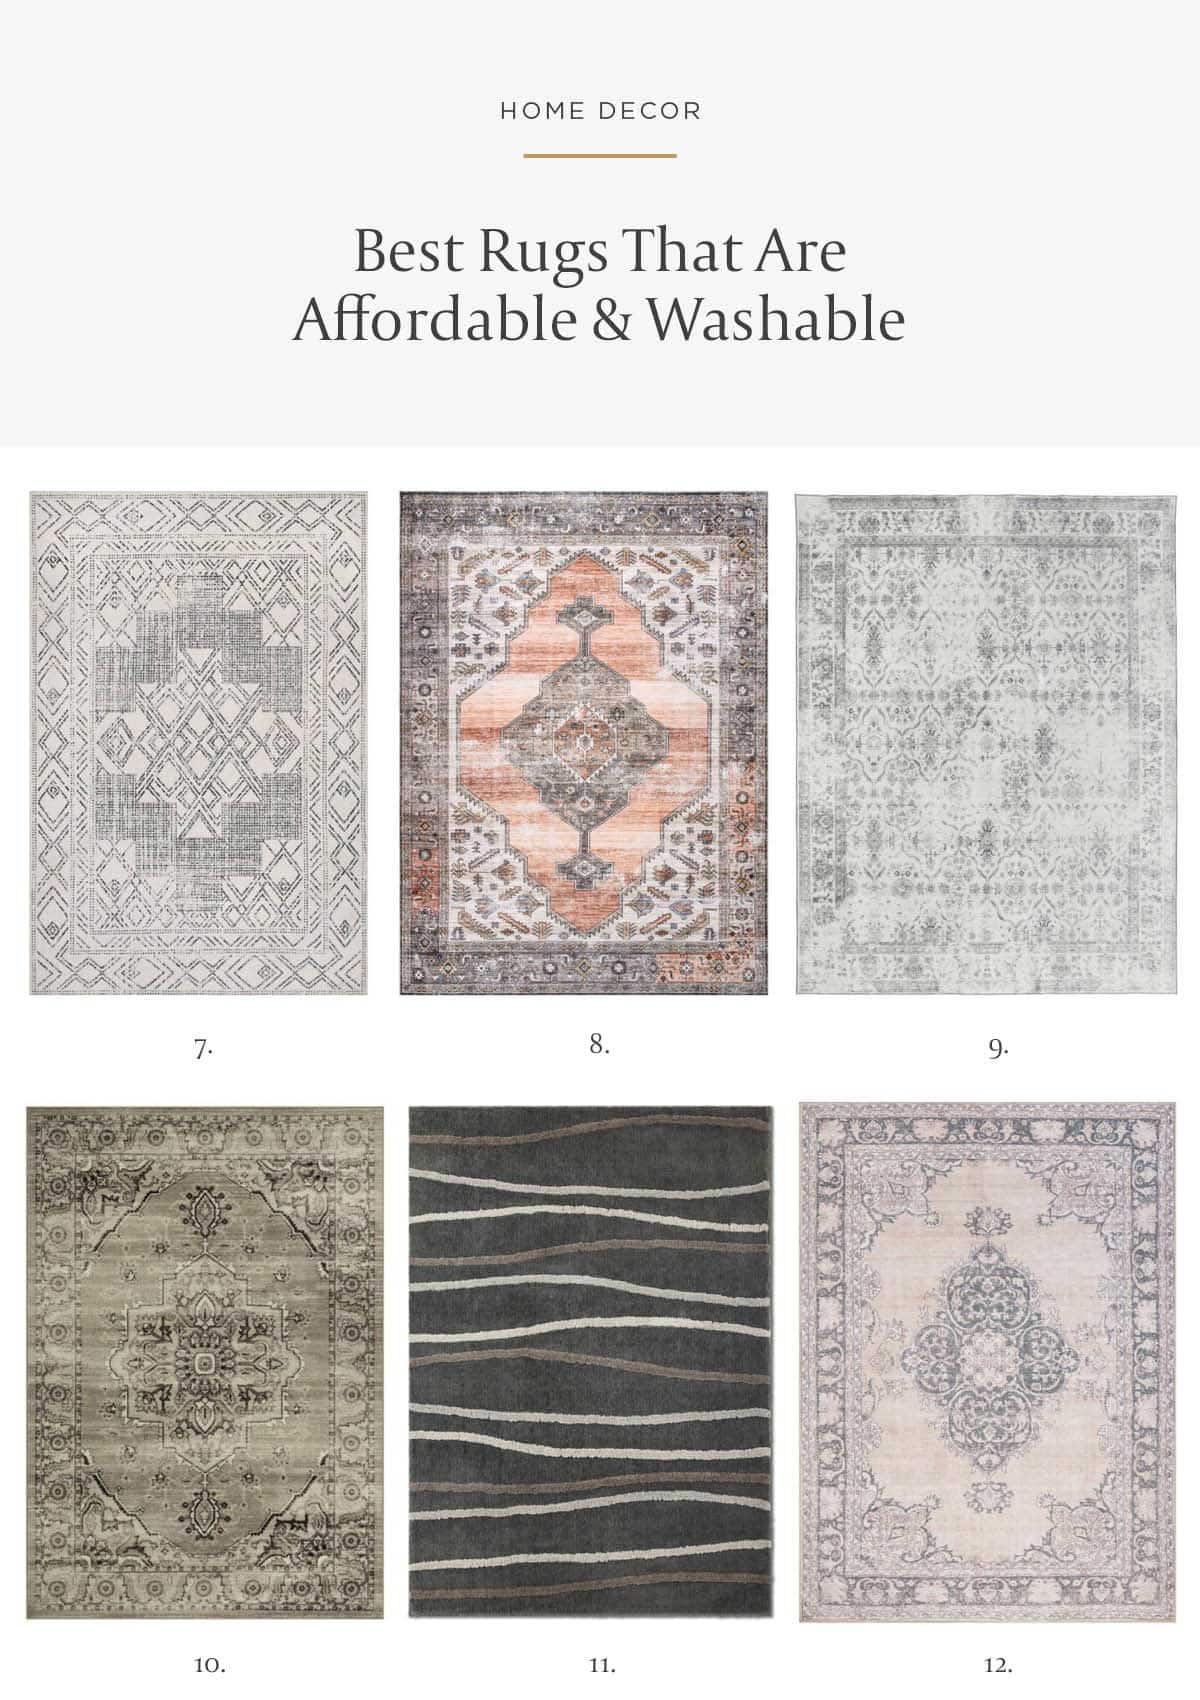 Best Affordable Rugs That Are Washable - A washable rug is perfect if you have kids or own a pet. A washable runner is also perfect for the kitchen.